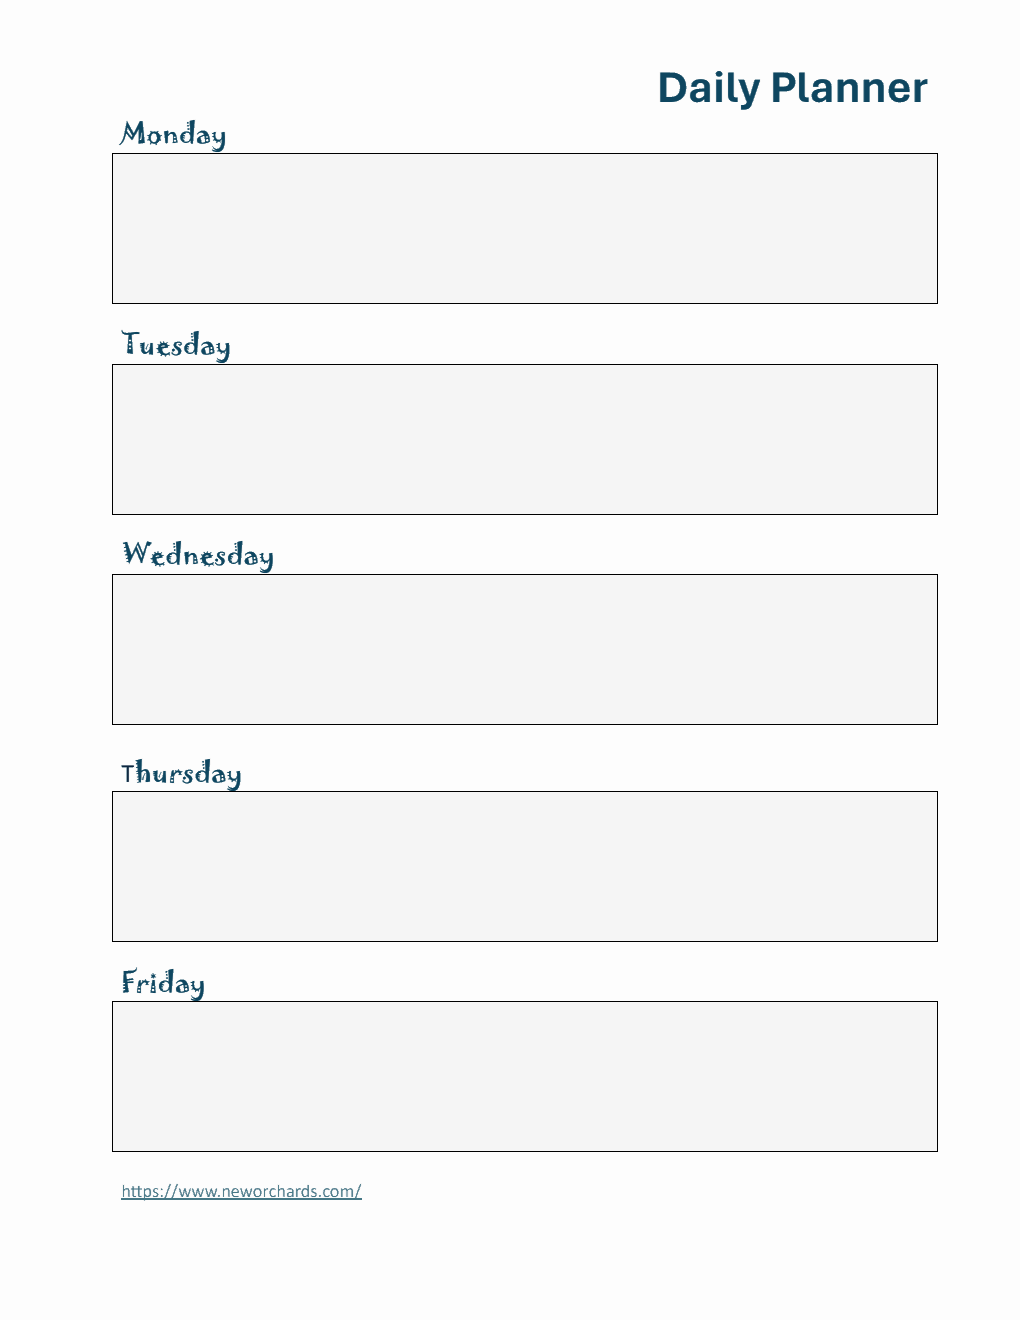 Daily Planner Template Printable in Word